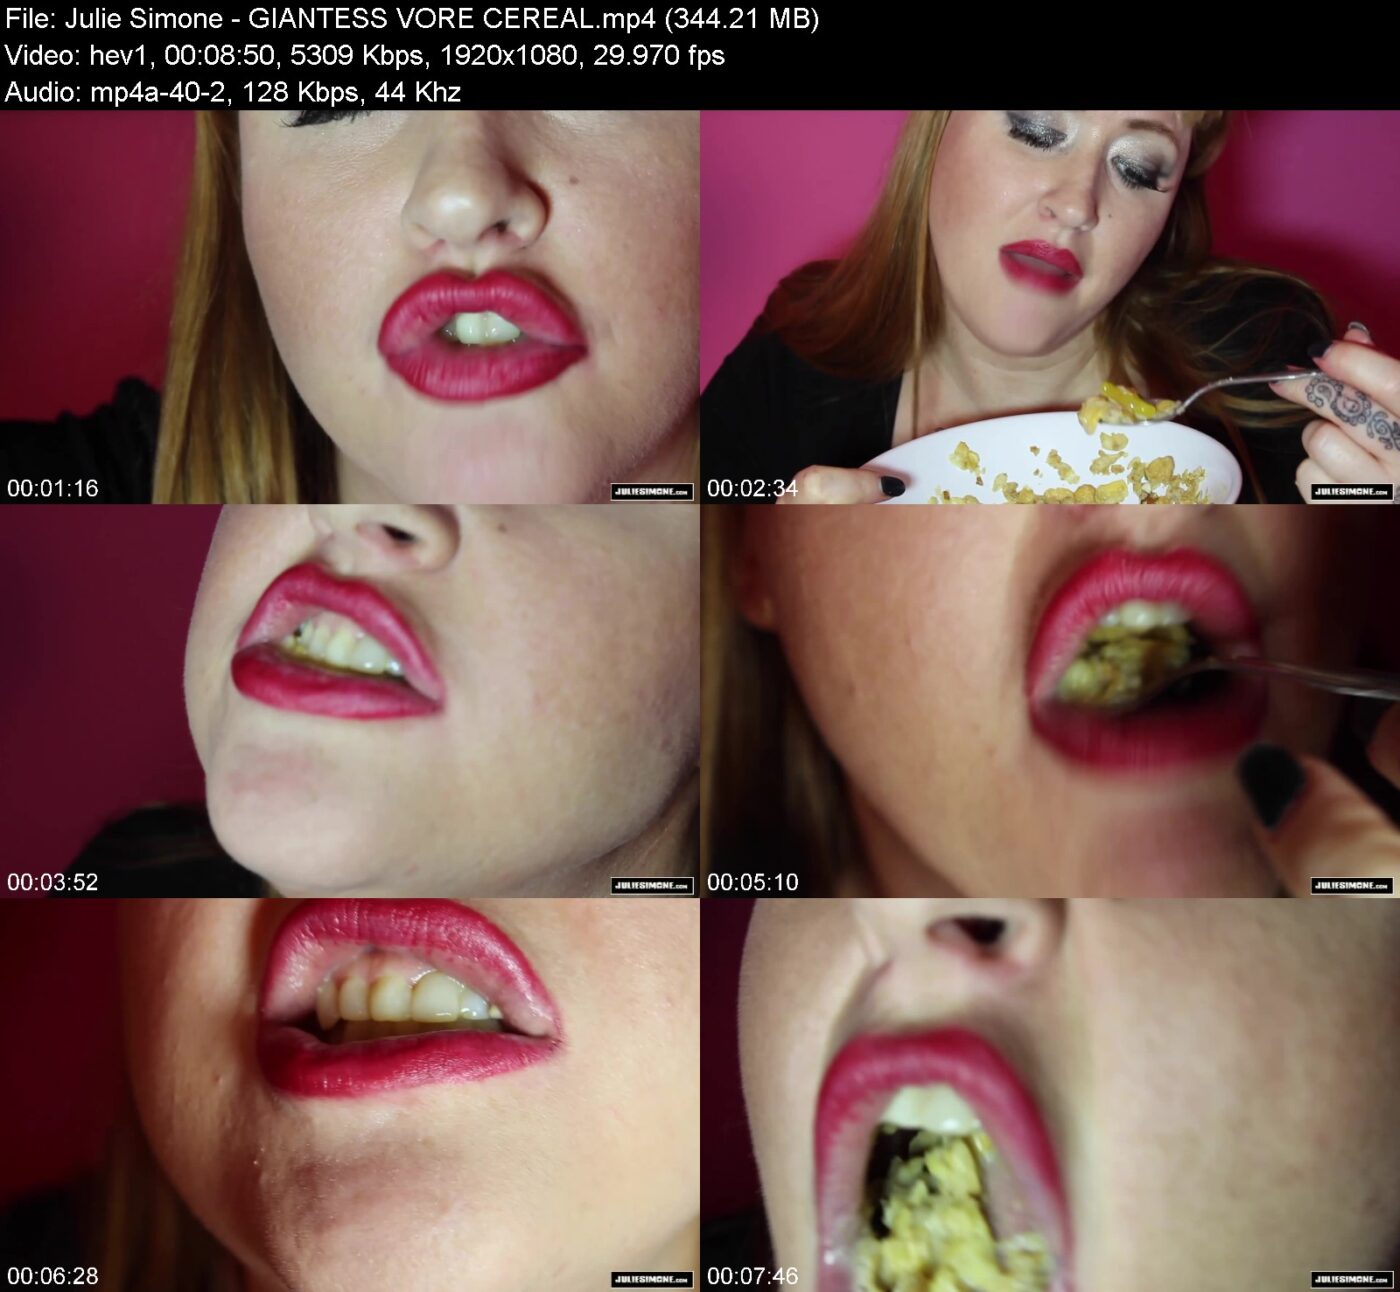 Actress: Julie Simone. Title and Studio: GIANTESS VORE CEREAL